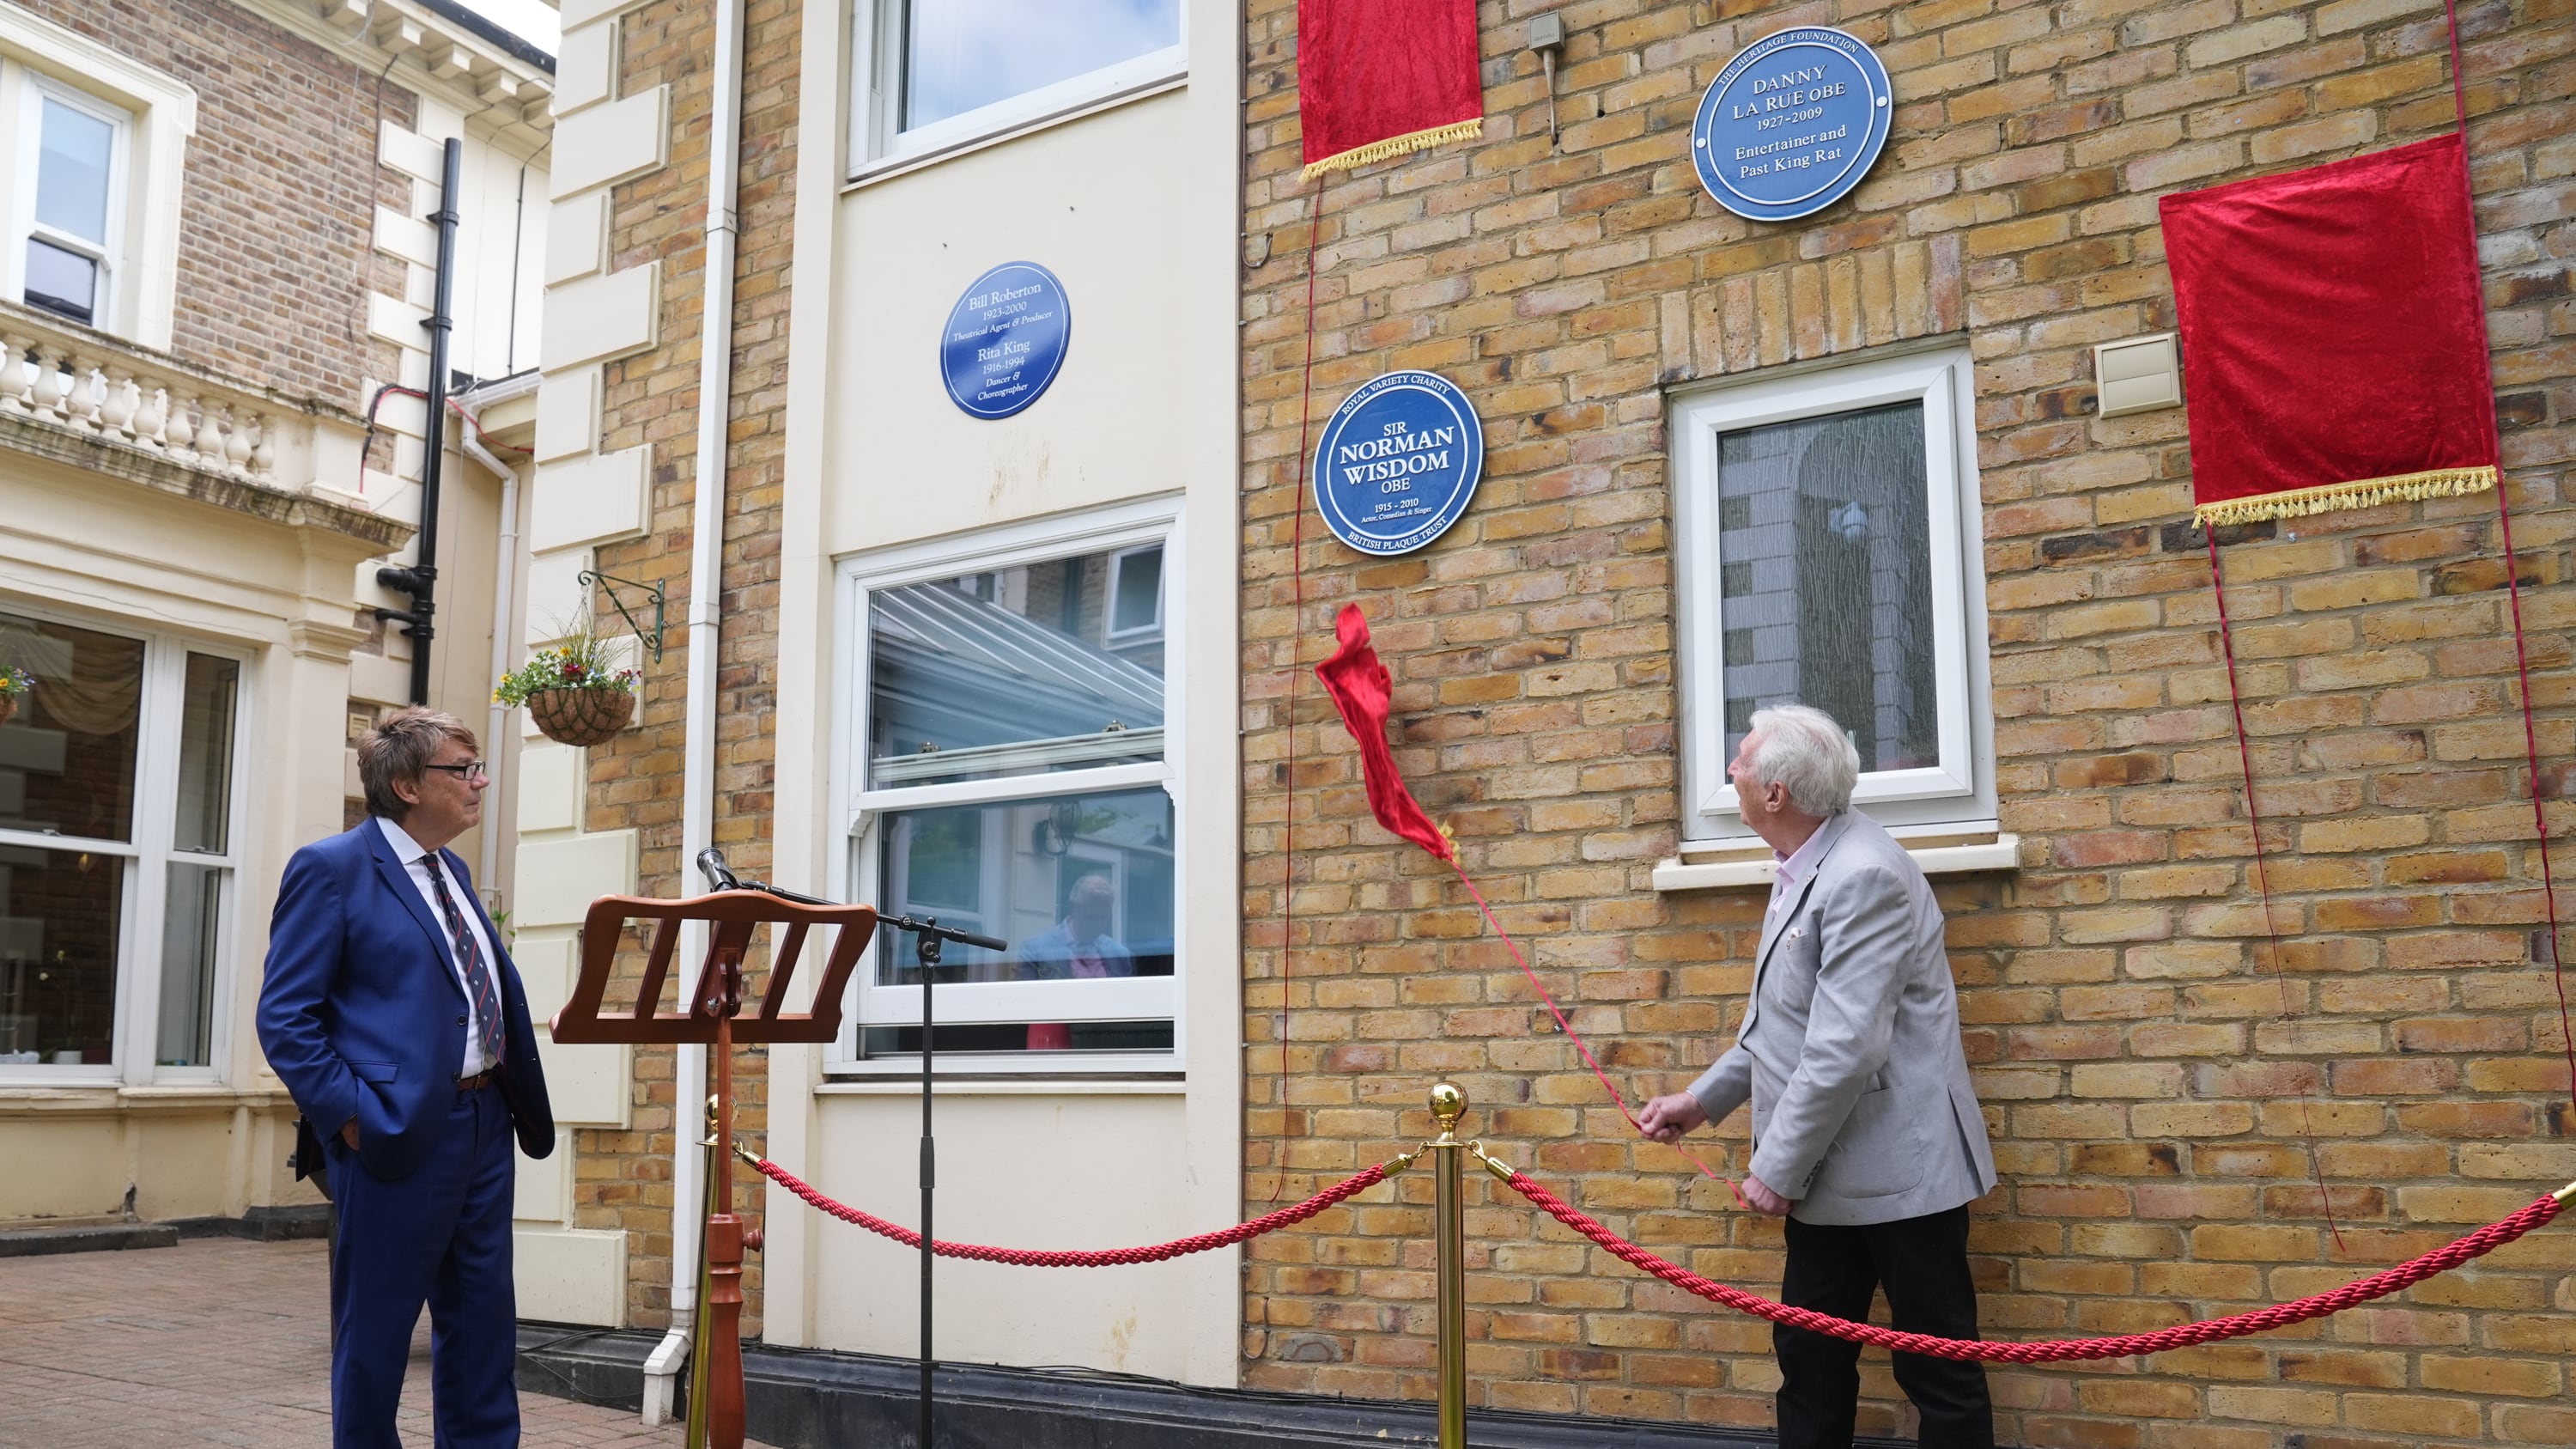 DJ Mike Read watches as Johnny Mans, who represented Sir Norman Wisdom, unveils a Blue Plaque in his name